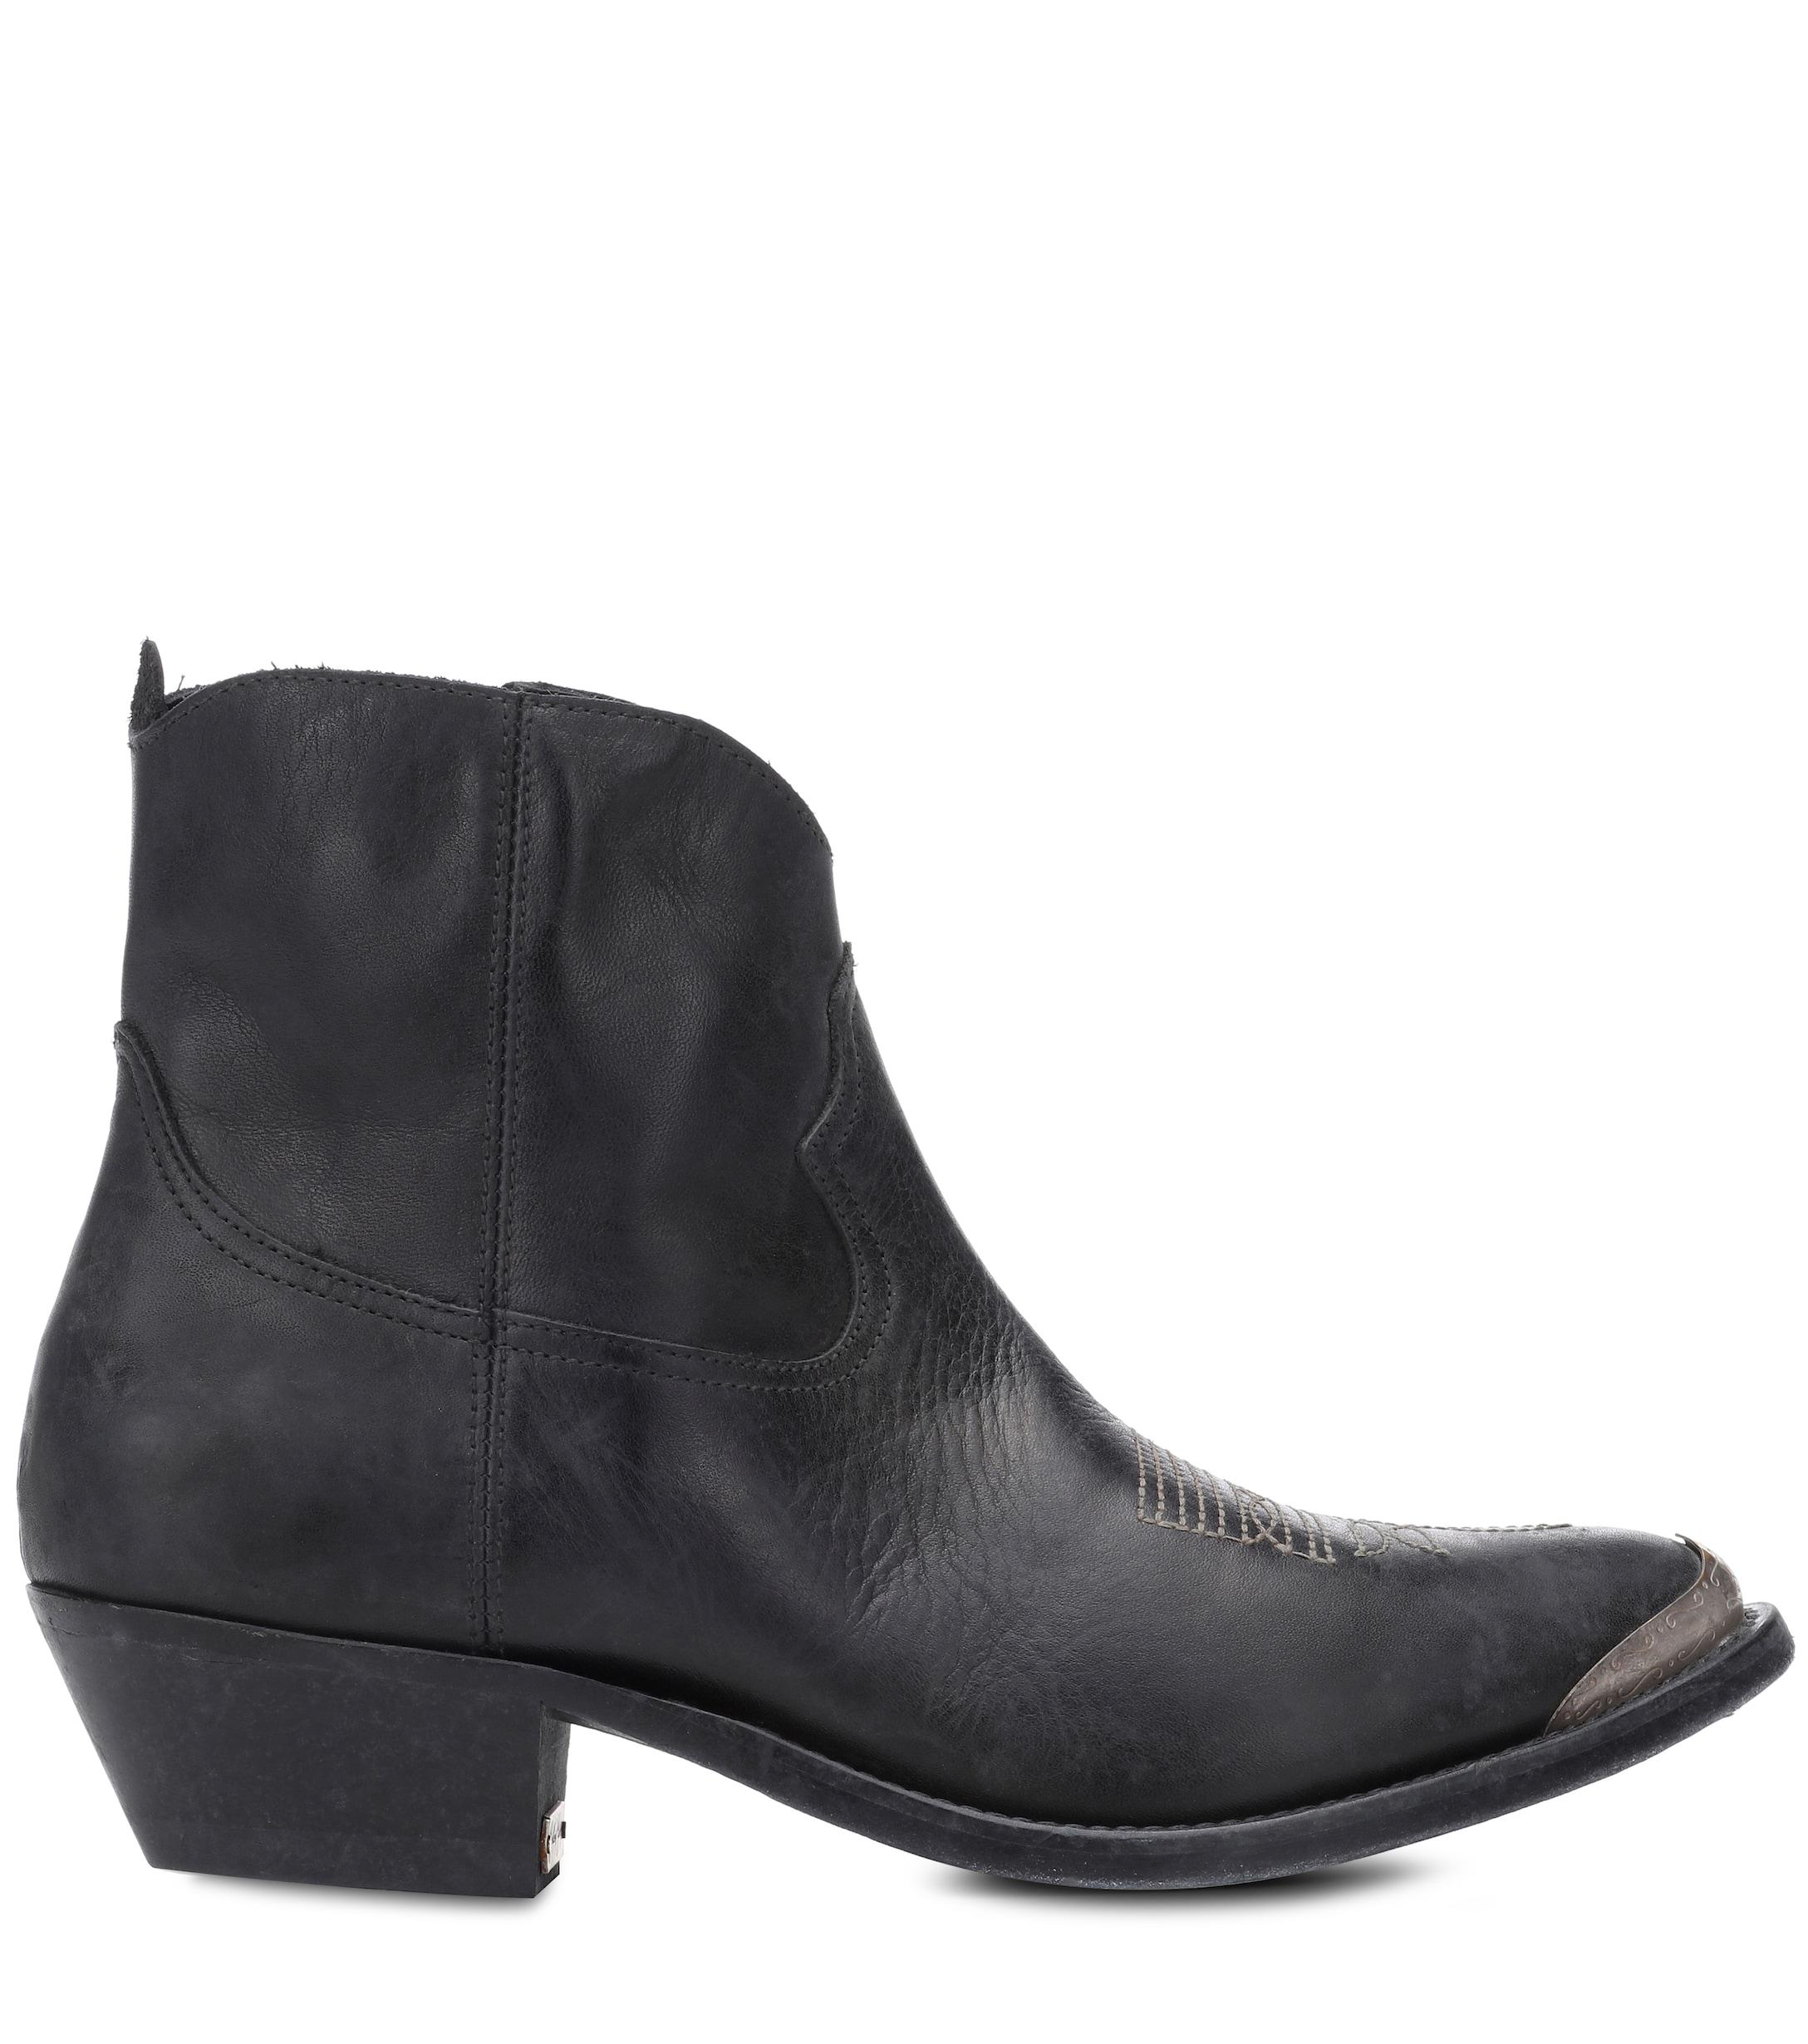 Golden Goose Deluxe Brand Goose Young Leather Ankle Boots in Black ...